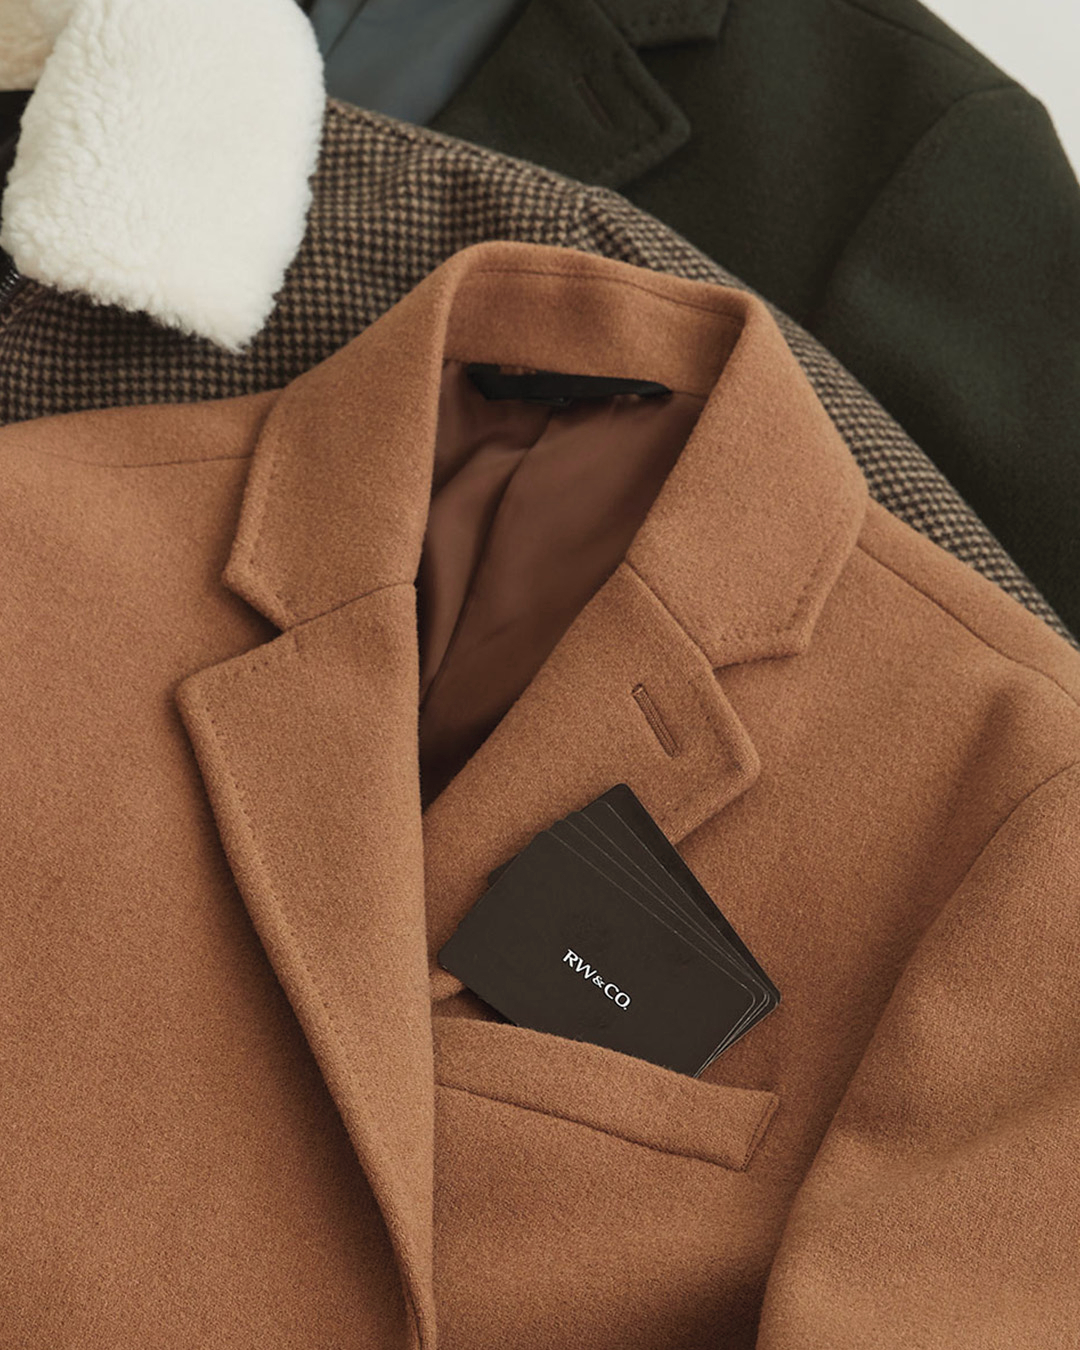 A tan coloured coat from RW&Co lays on top of other clothing.